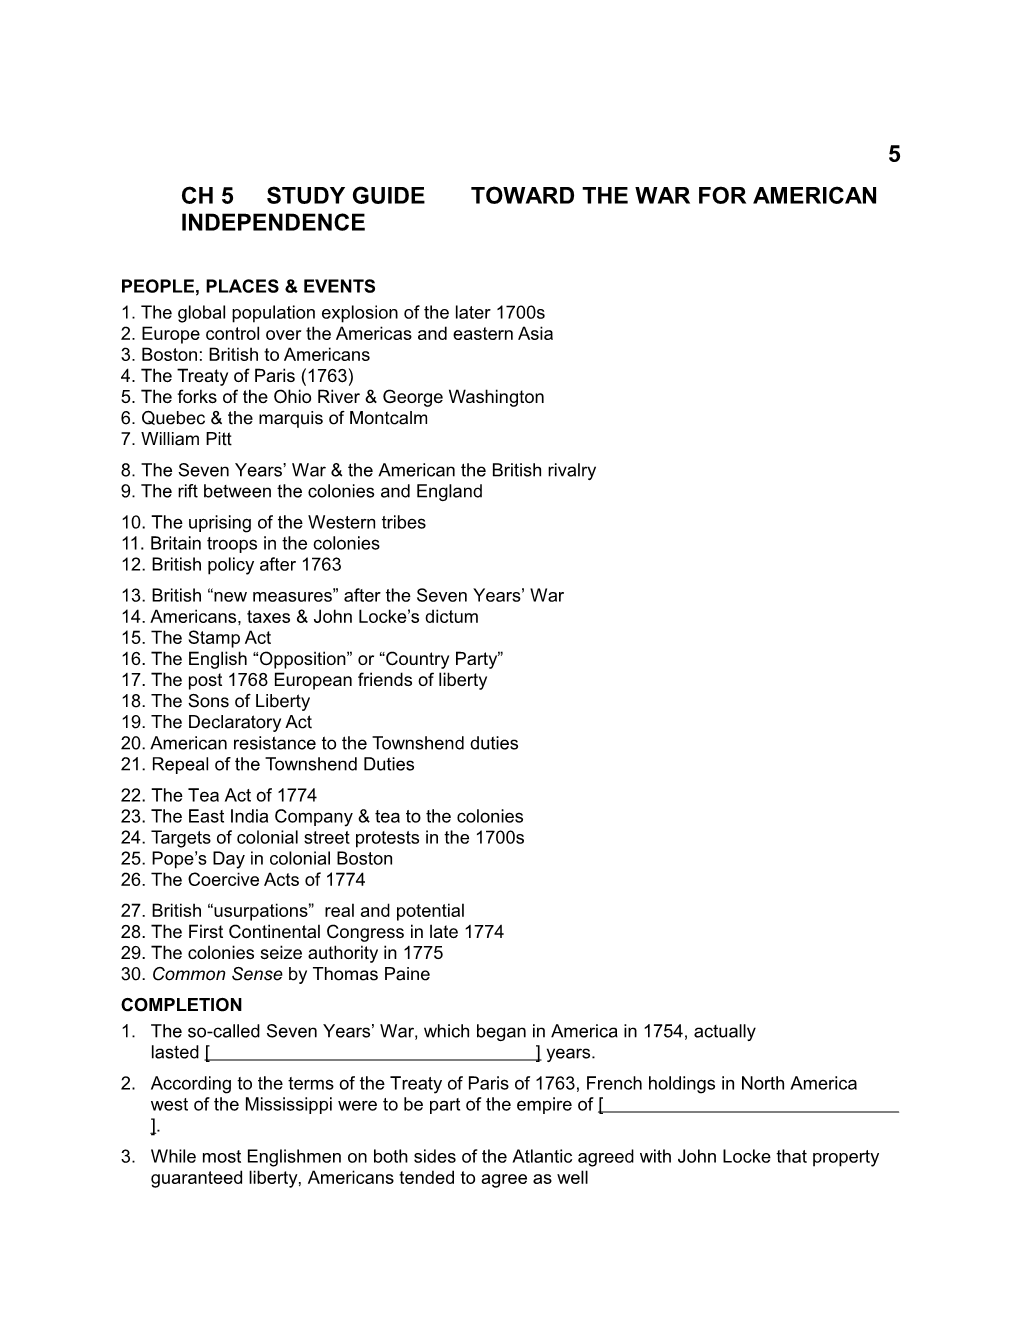 Ch 5 Study Guide TOWARD the WAR for AMERICAN INDEPENDENCE